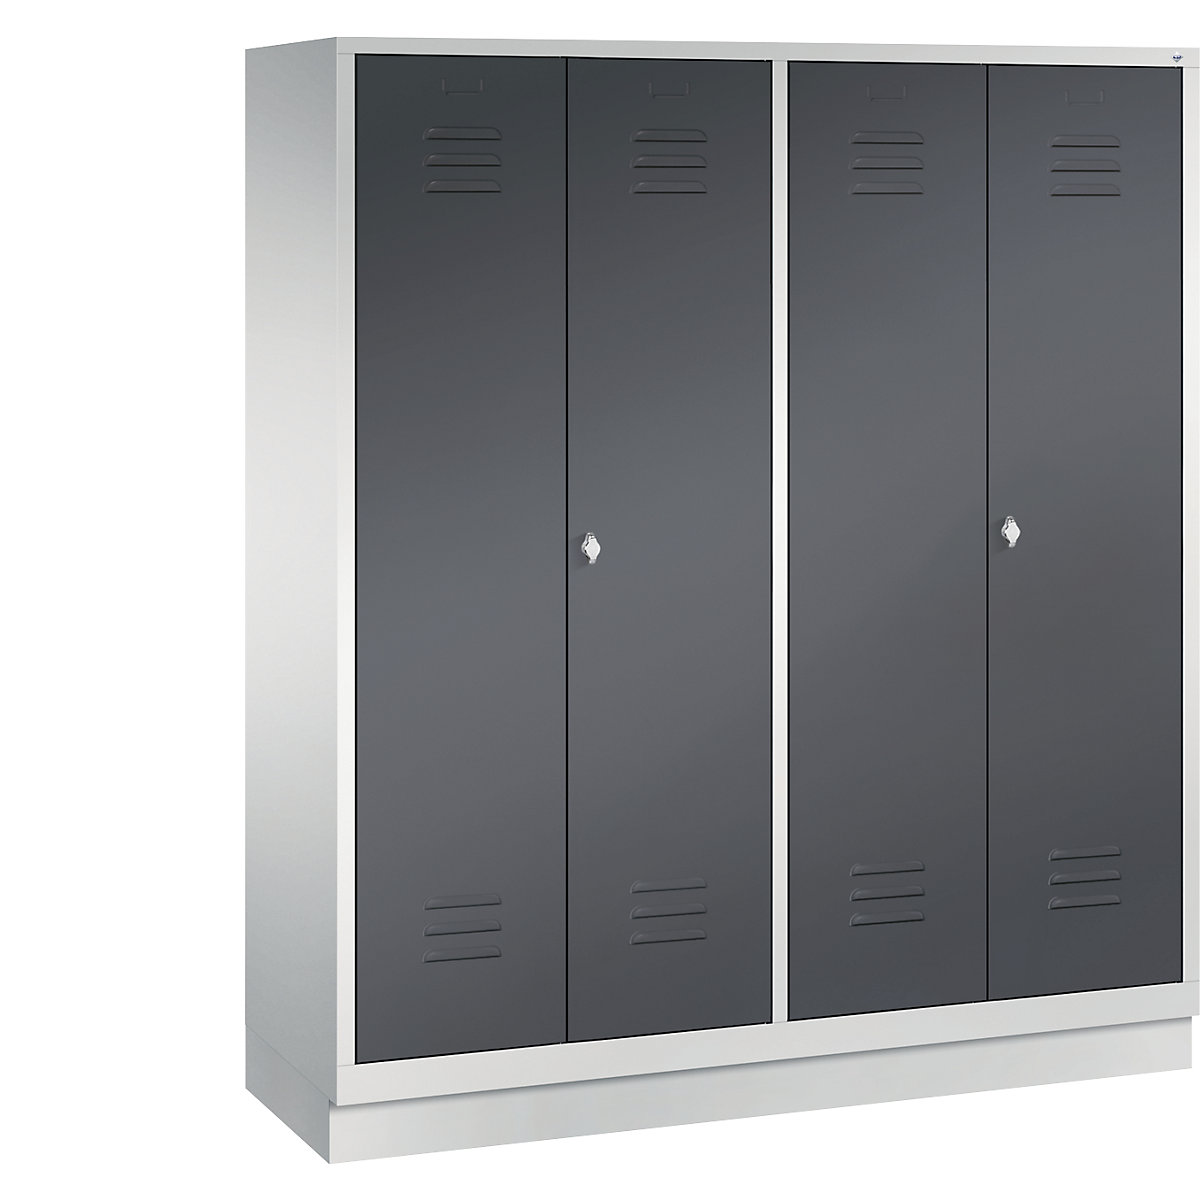 CLASSIC cloakroom locker with plinth, doors close in the middle – C+P, 4 compartments, compartment width 400 mm, light grey / black grey-6